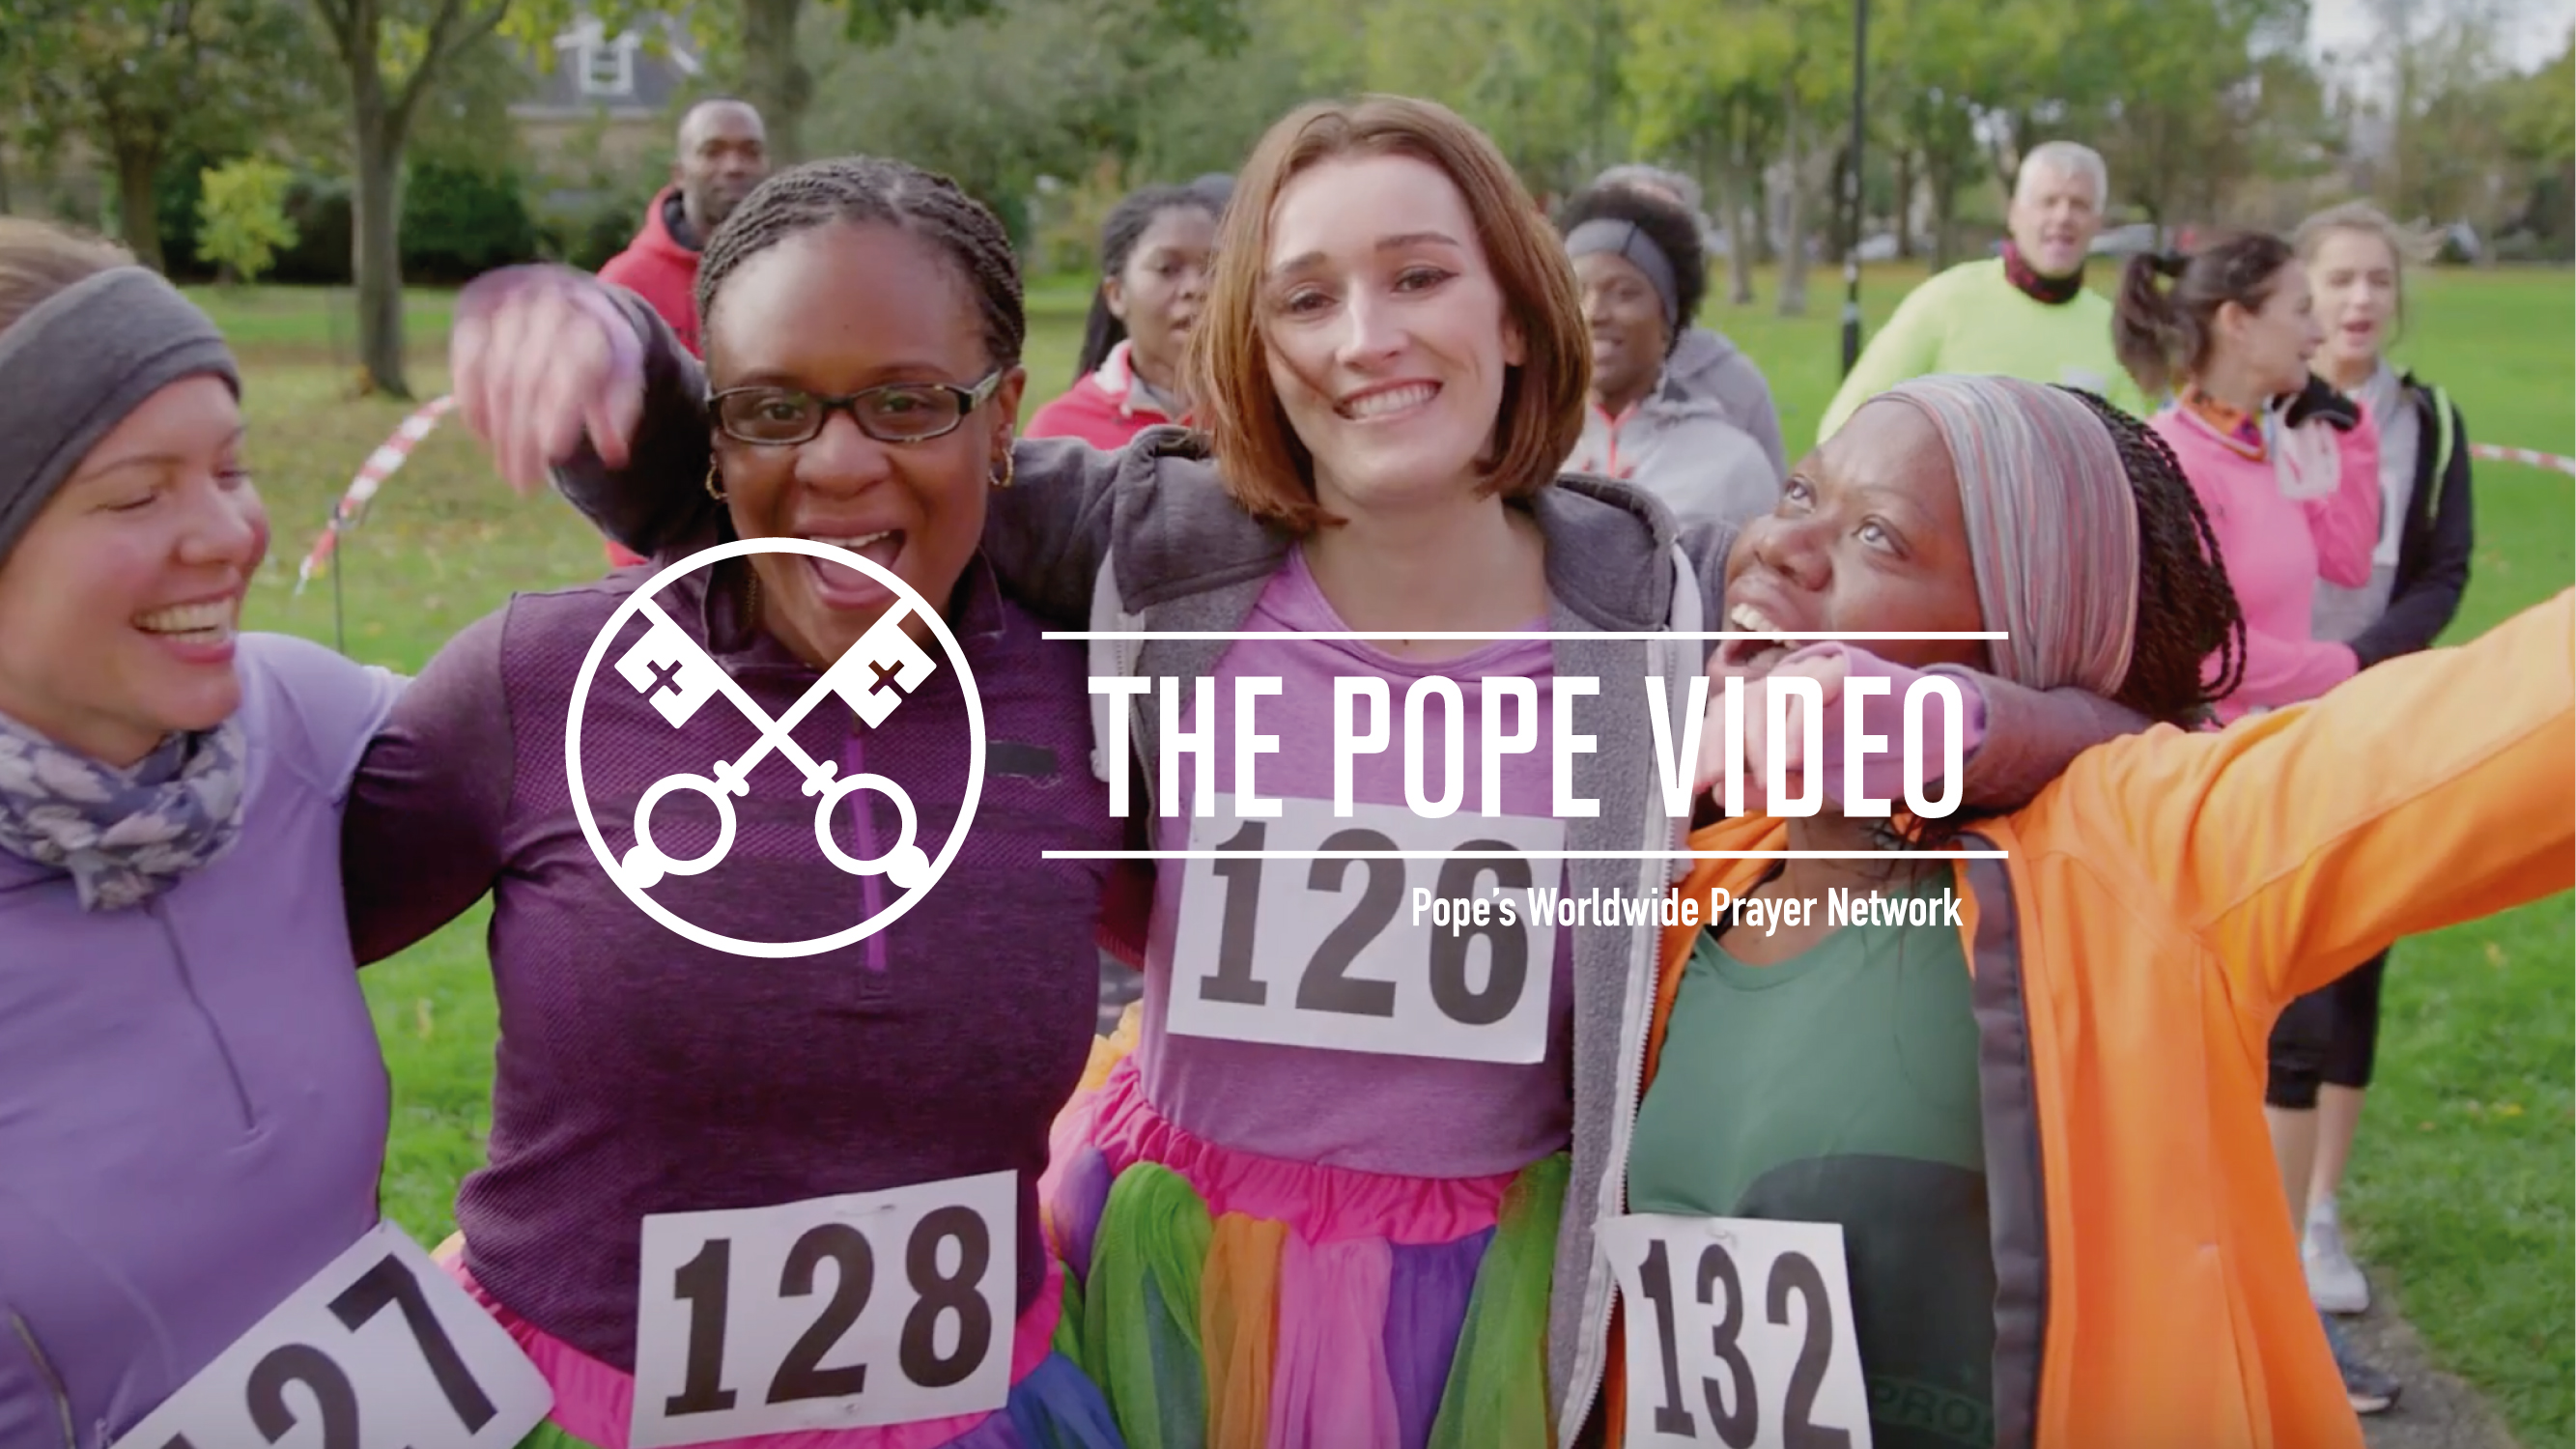 The Pope Video May 2018 (Official Image)